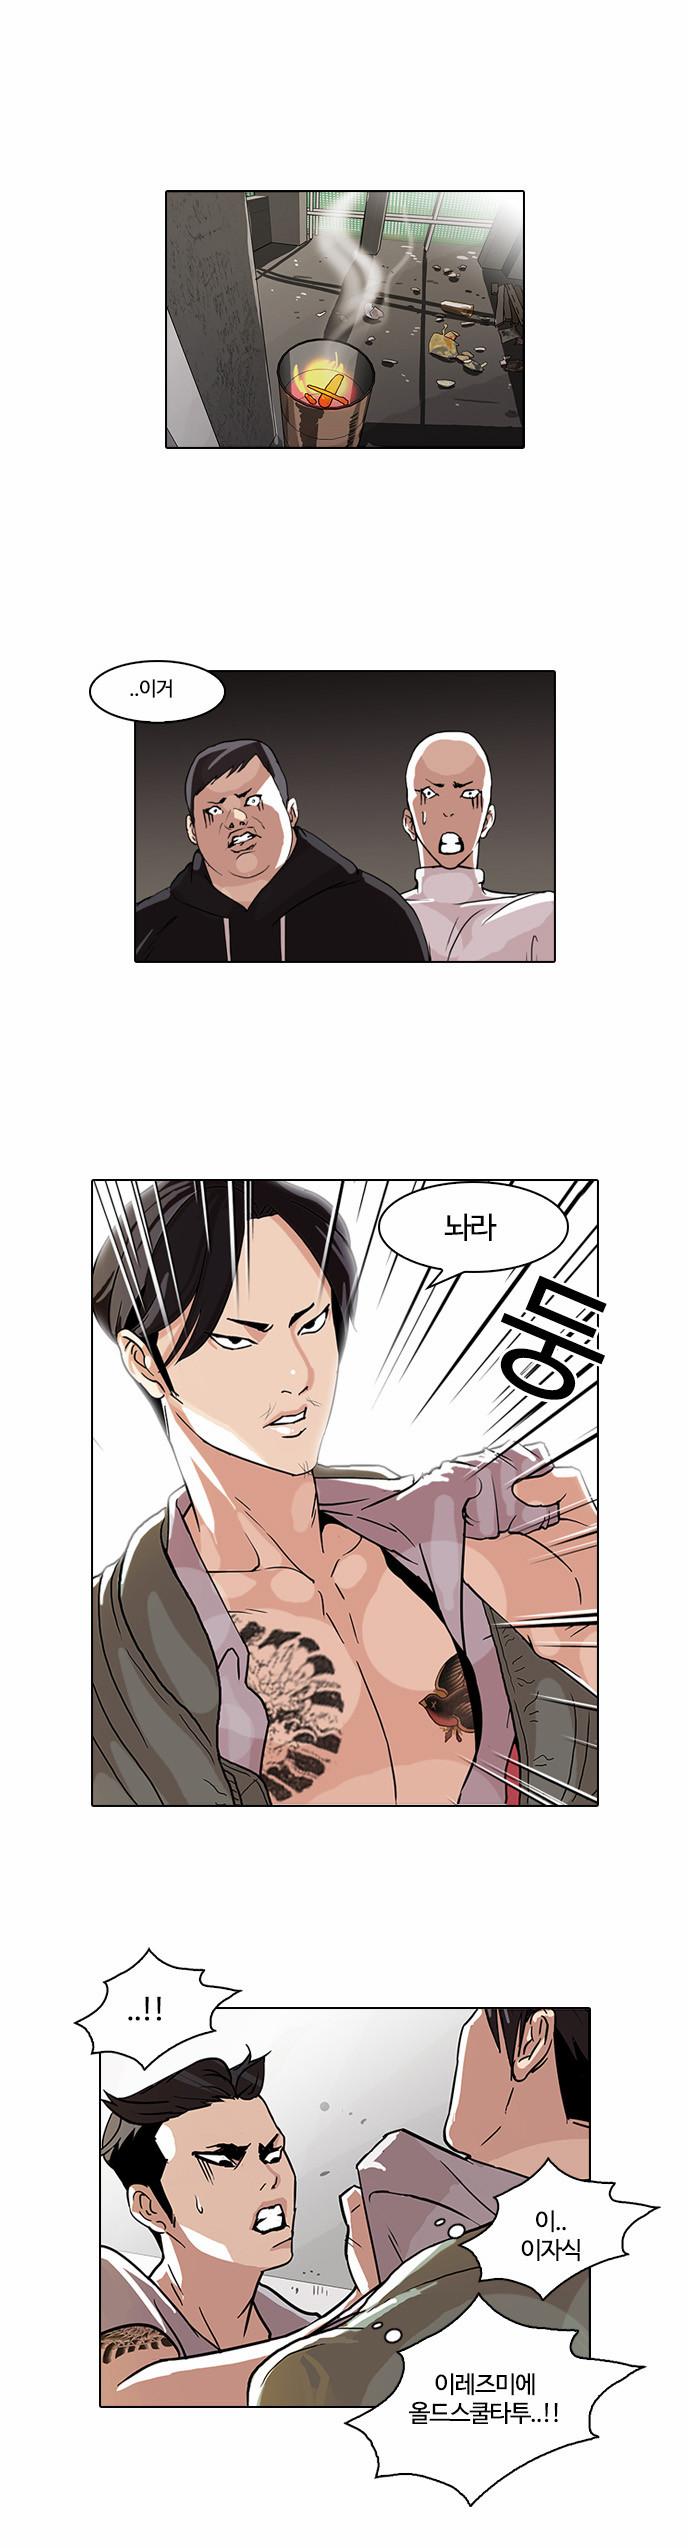 Lookism - Chapter 68 - Page 1